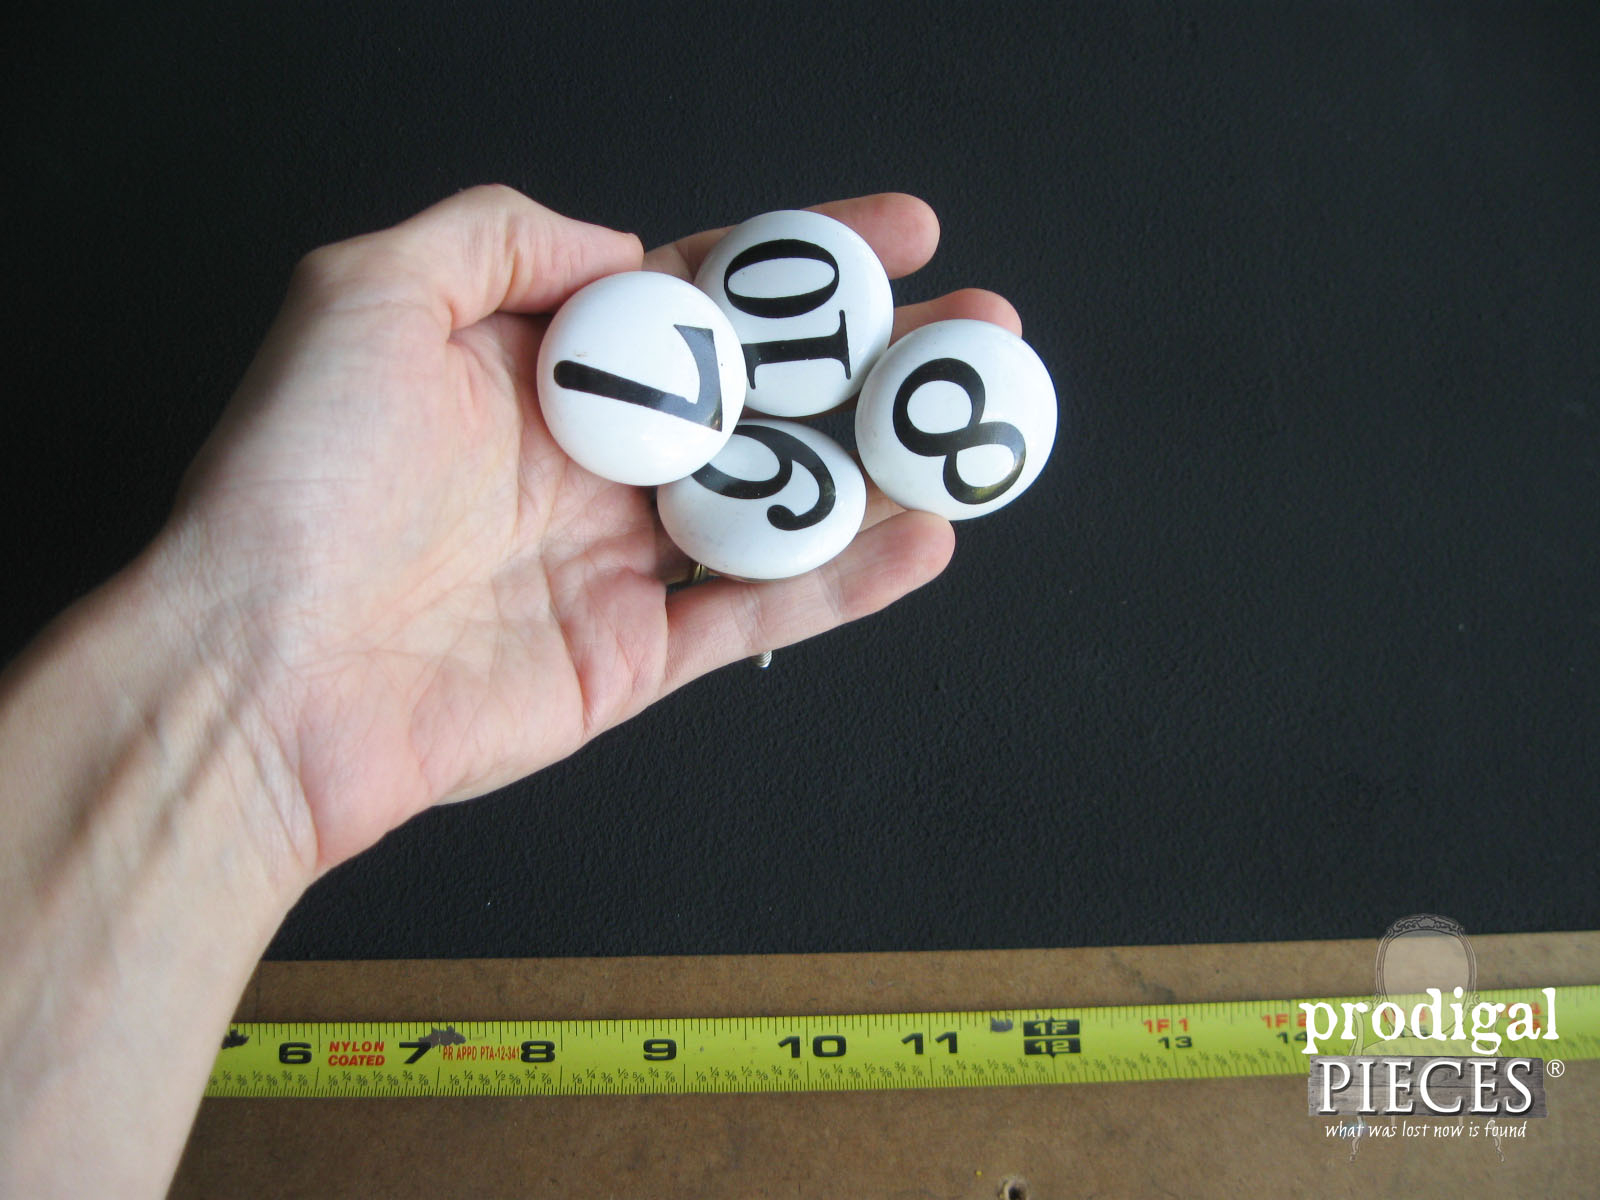 Numbered Drawers Pulls from Magnetic Message Board | Prodigal Pieces | prodigalpieces.com